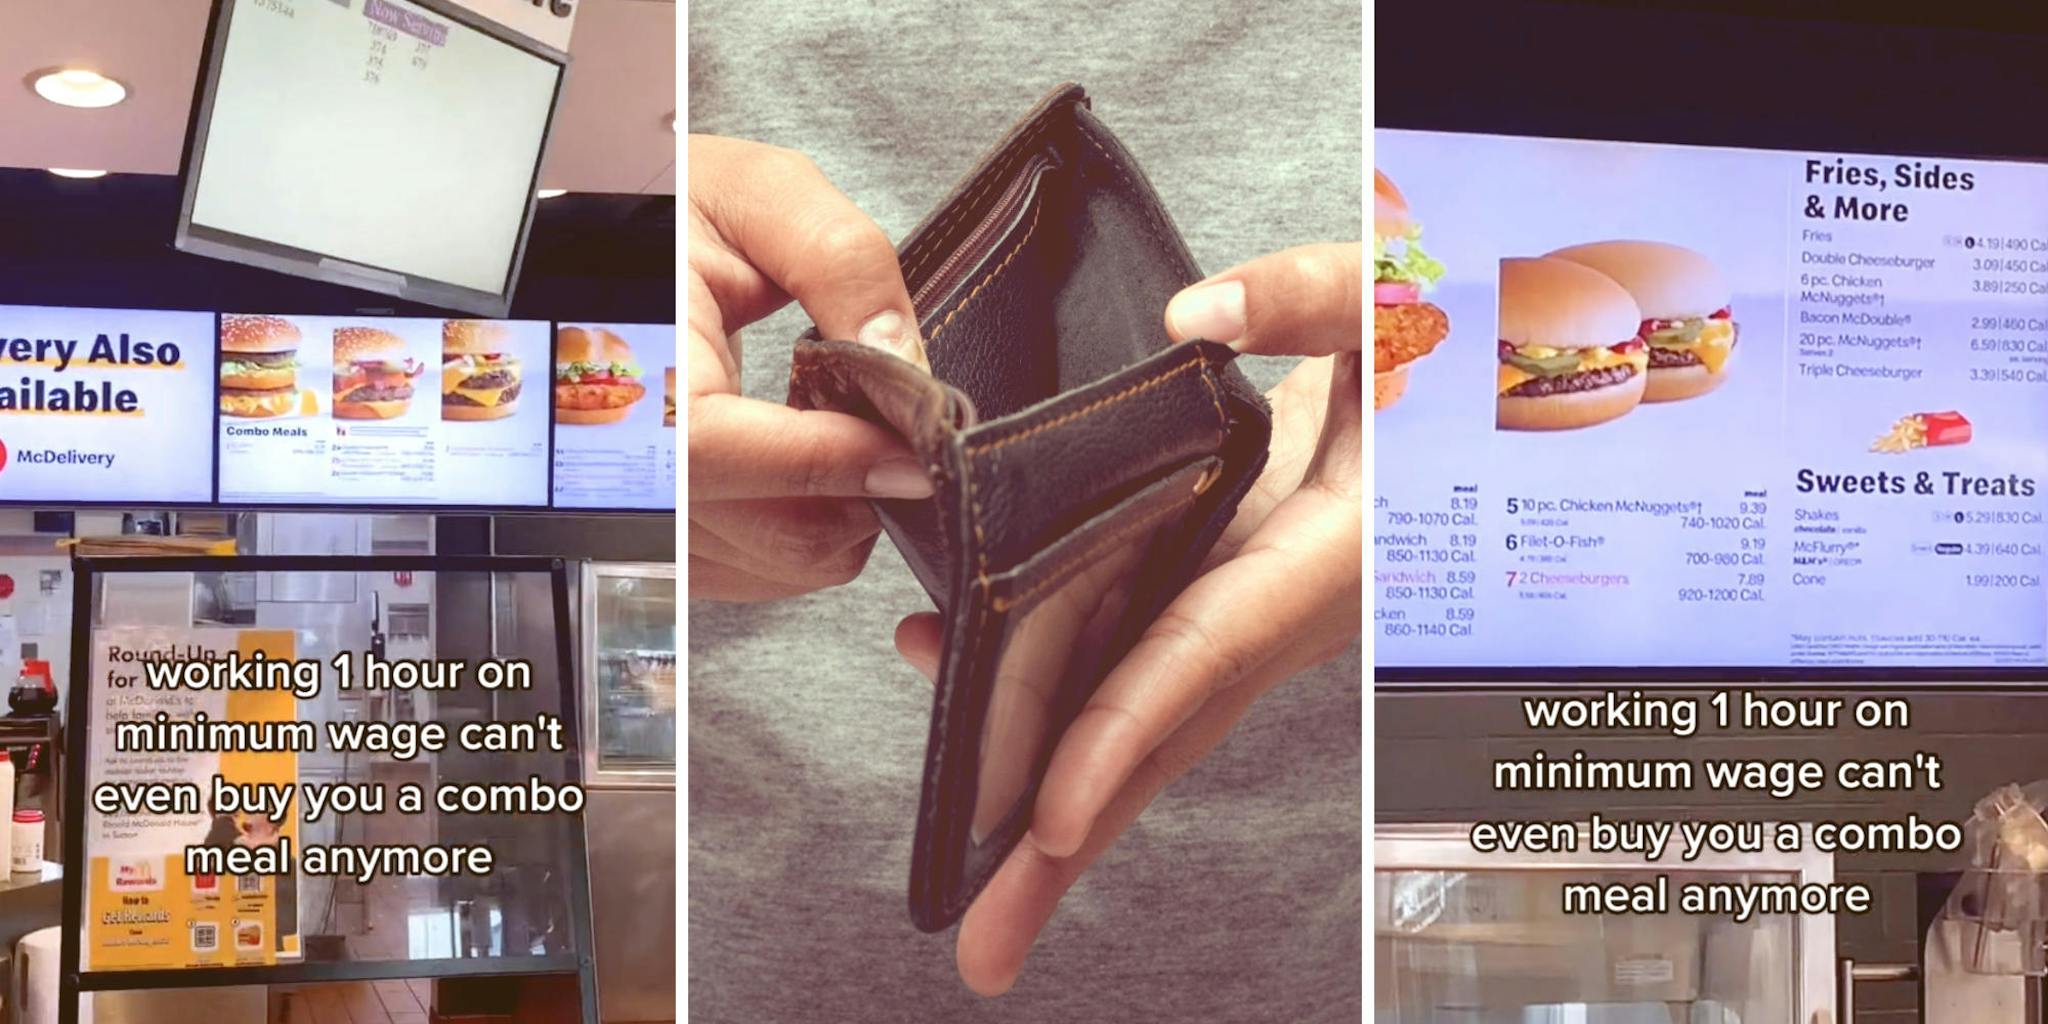 ‘Working an hour minimum wage can’t even buy you a combo’: TikToker shows how workers can’t afford a McDonald’s combo on an hour of minimum wage in viral TikTok